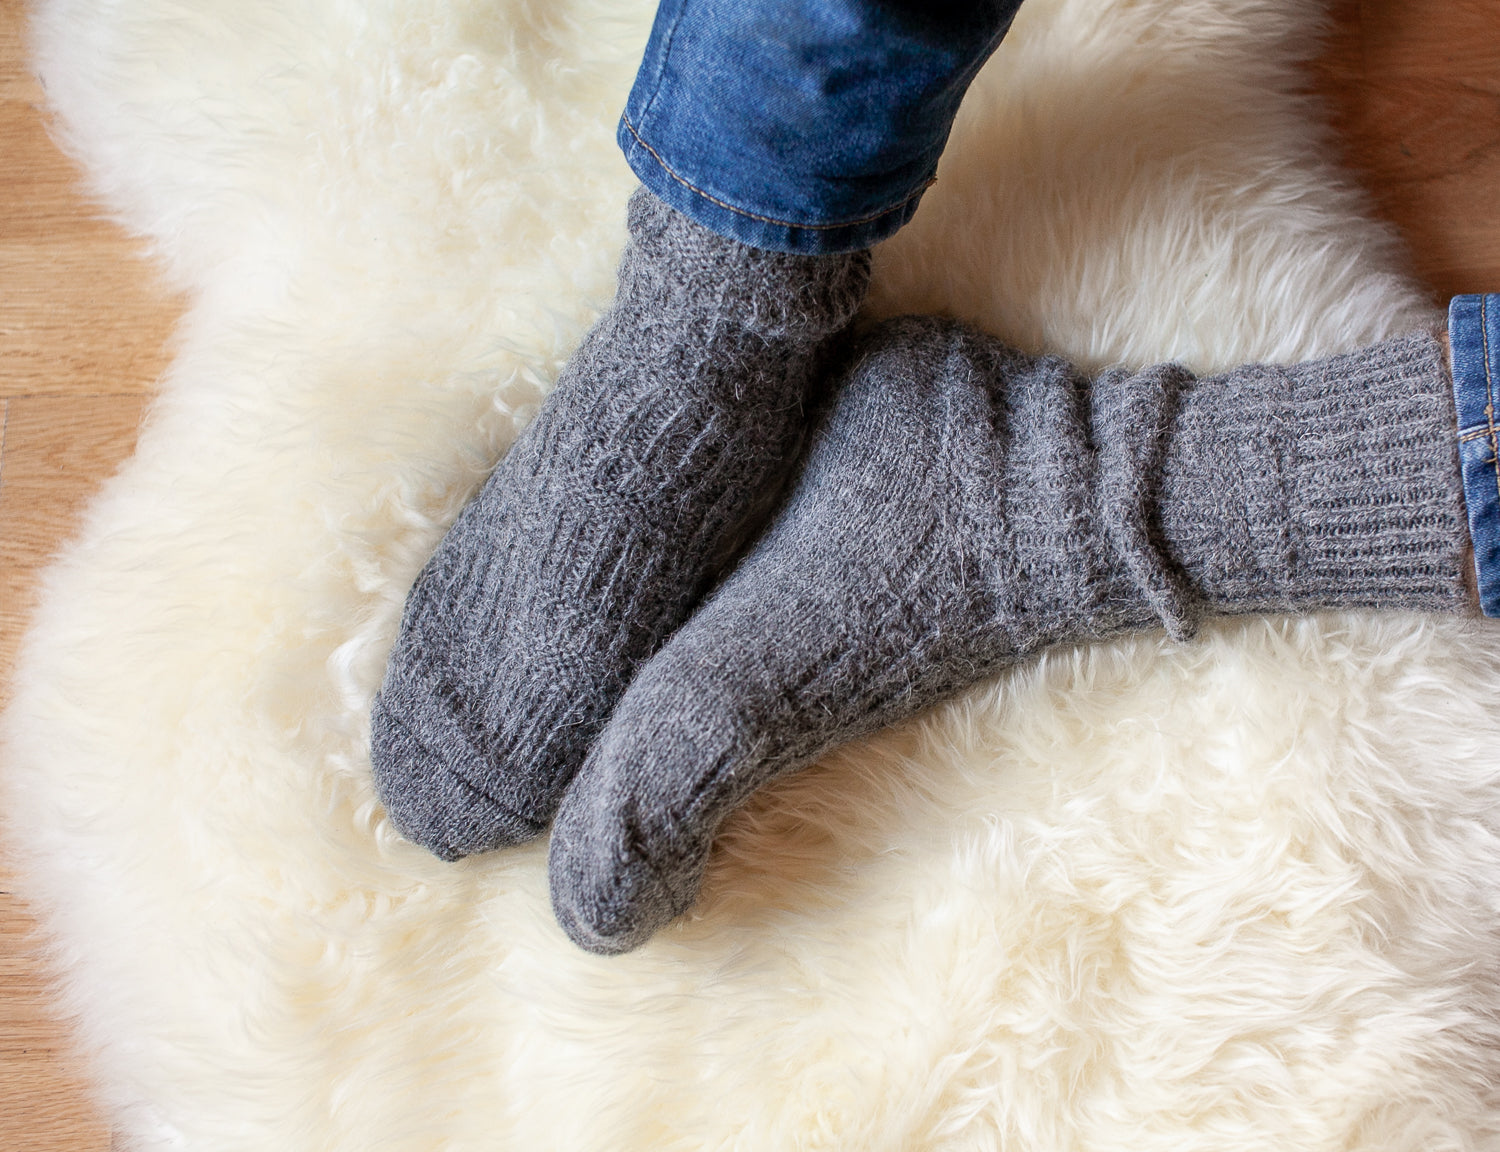 Gray color, wool socks for men, very warm. In the background cream sheepskin rug